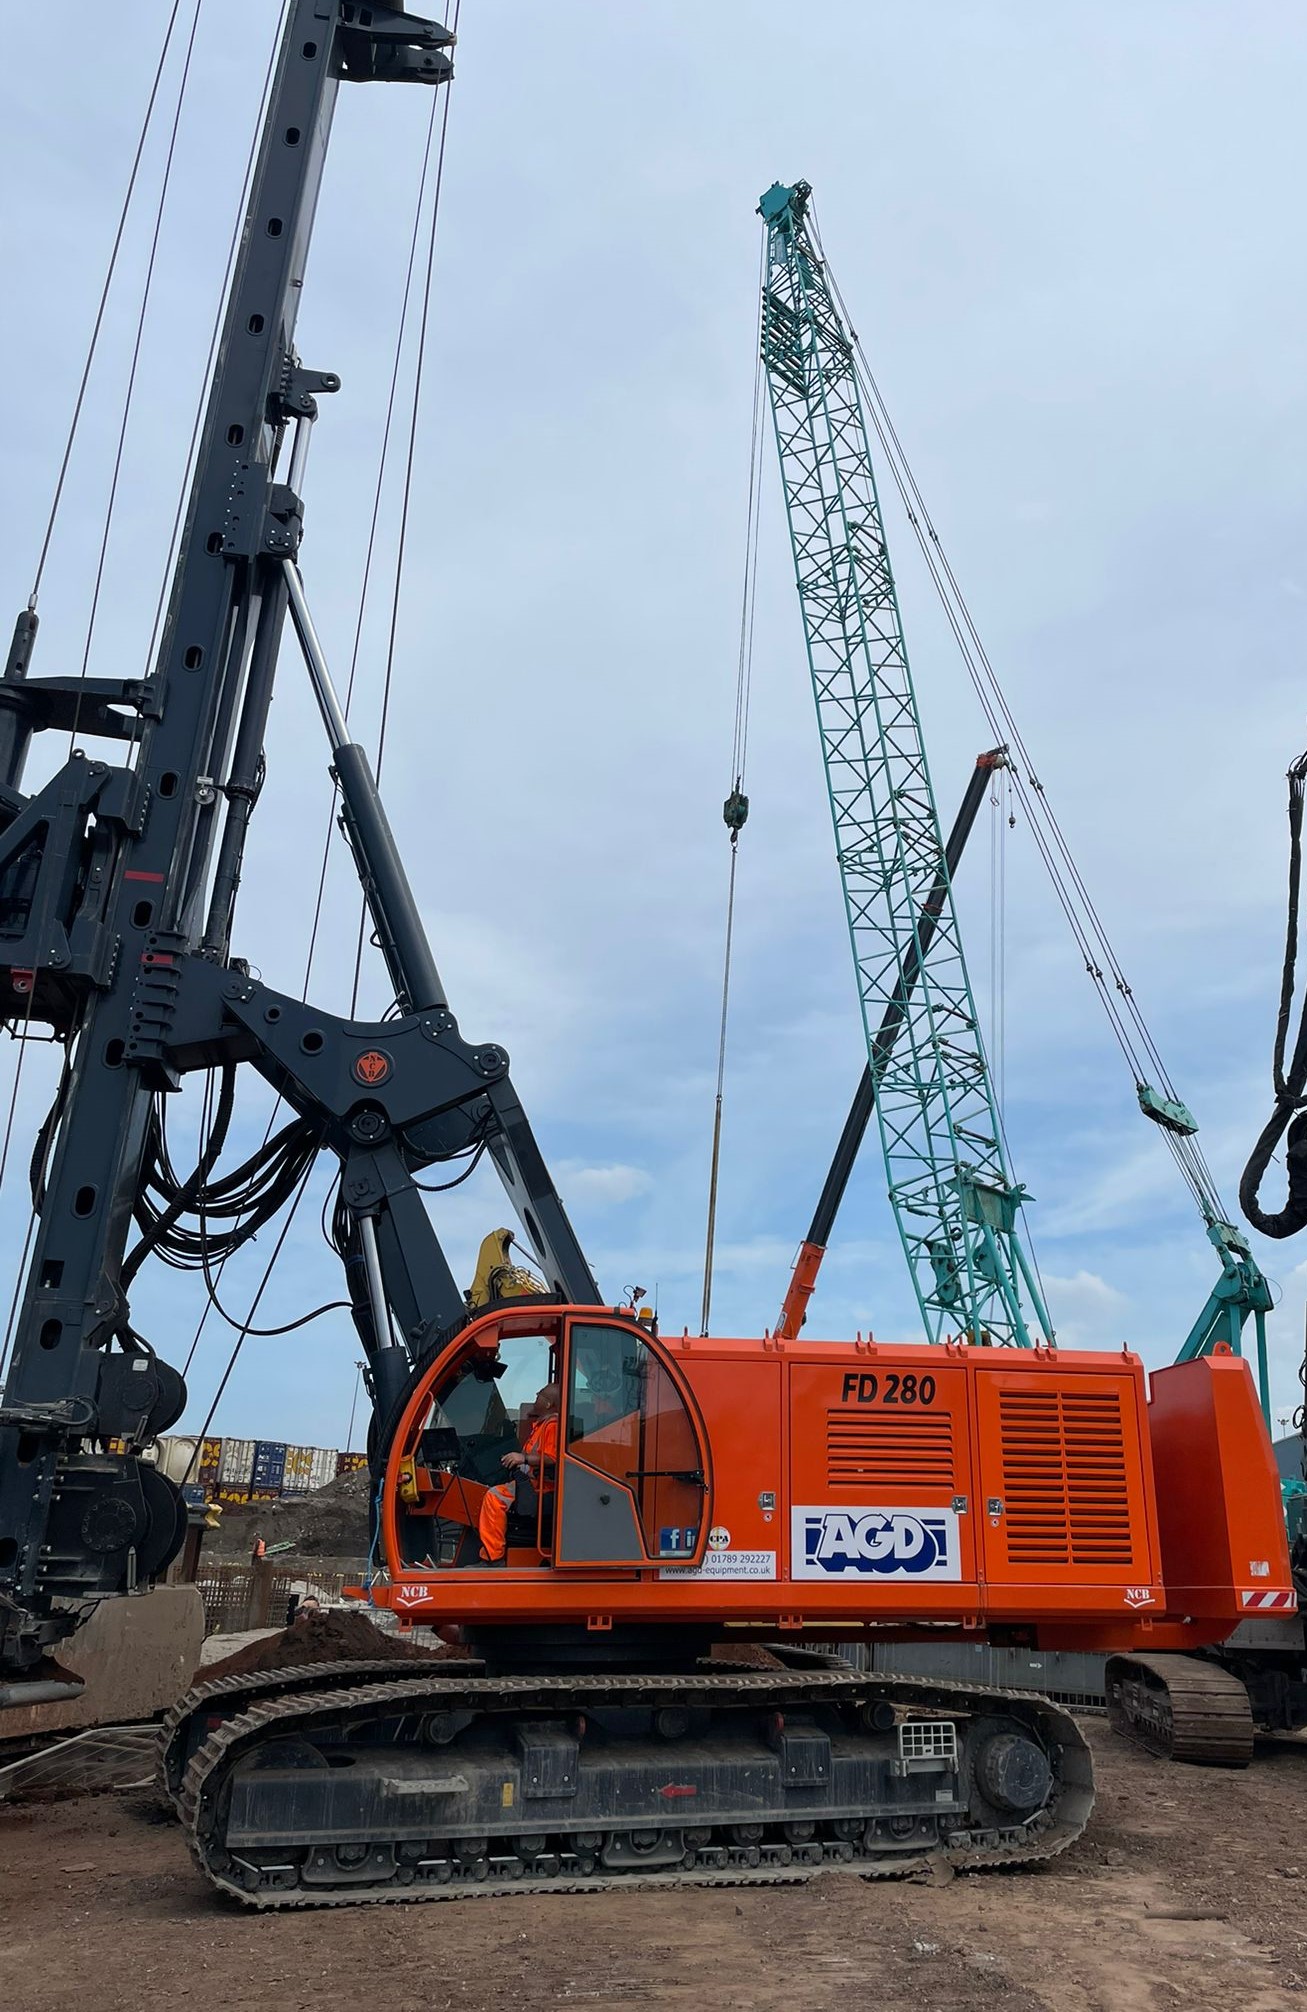 Suppliers of UK Pioneer In Rotary Piling Rig Hire UK